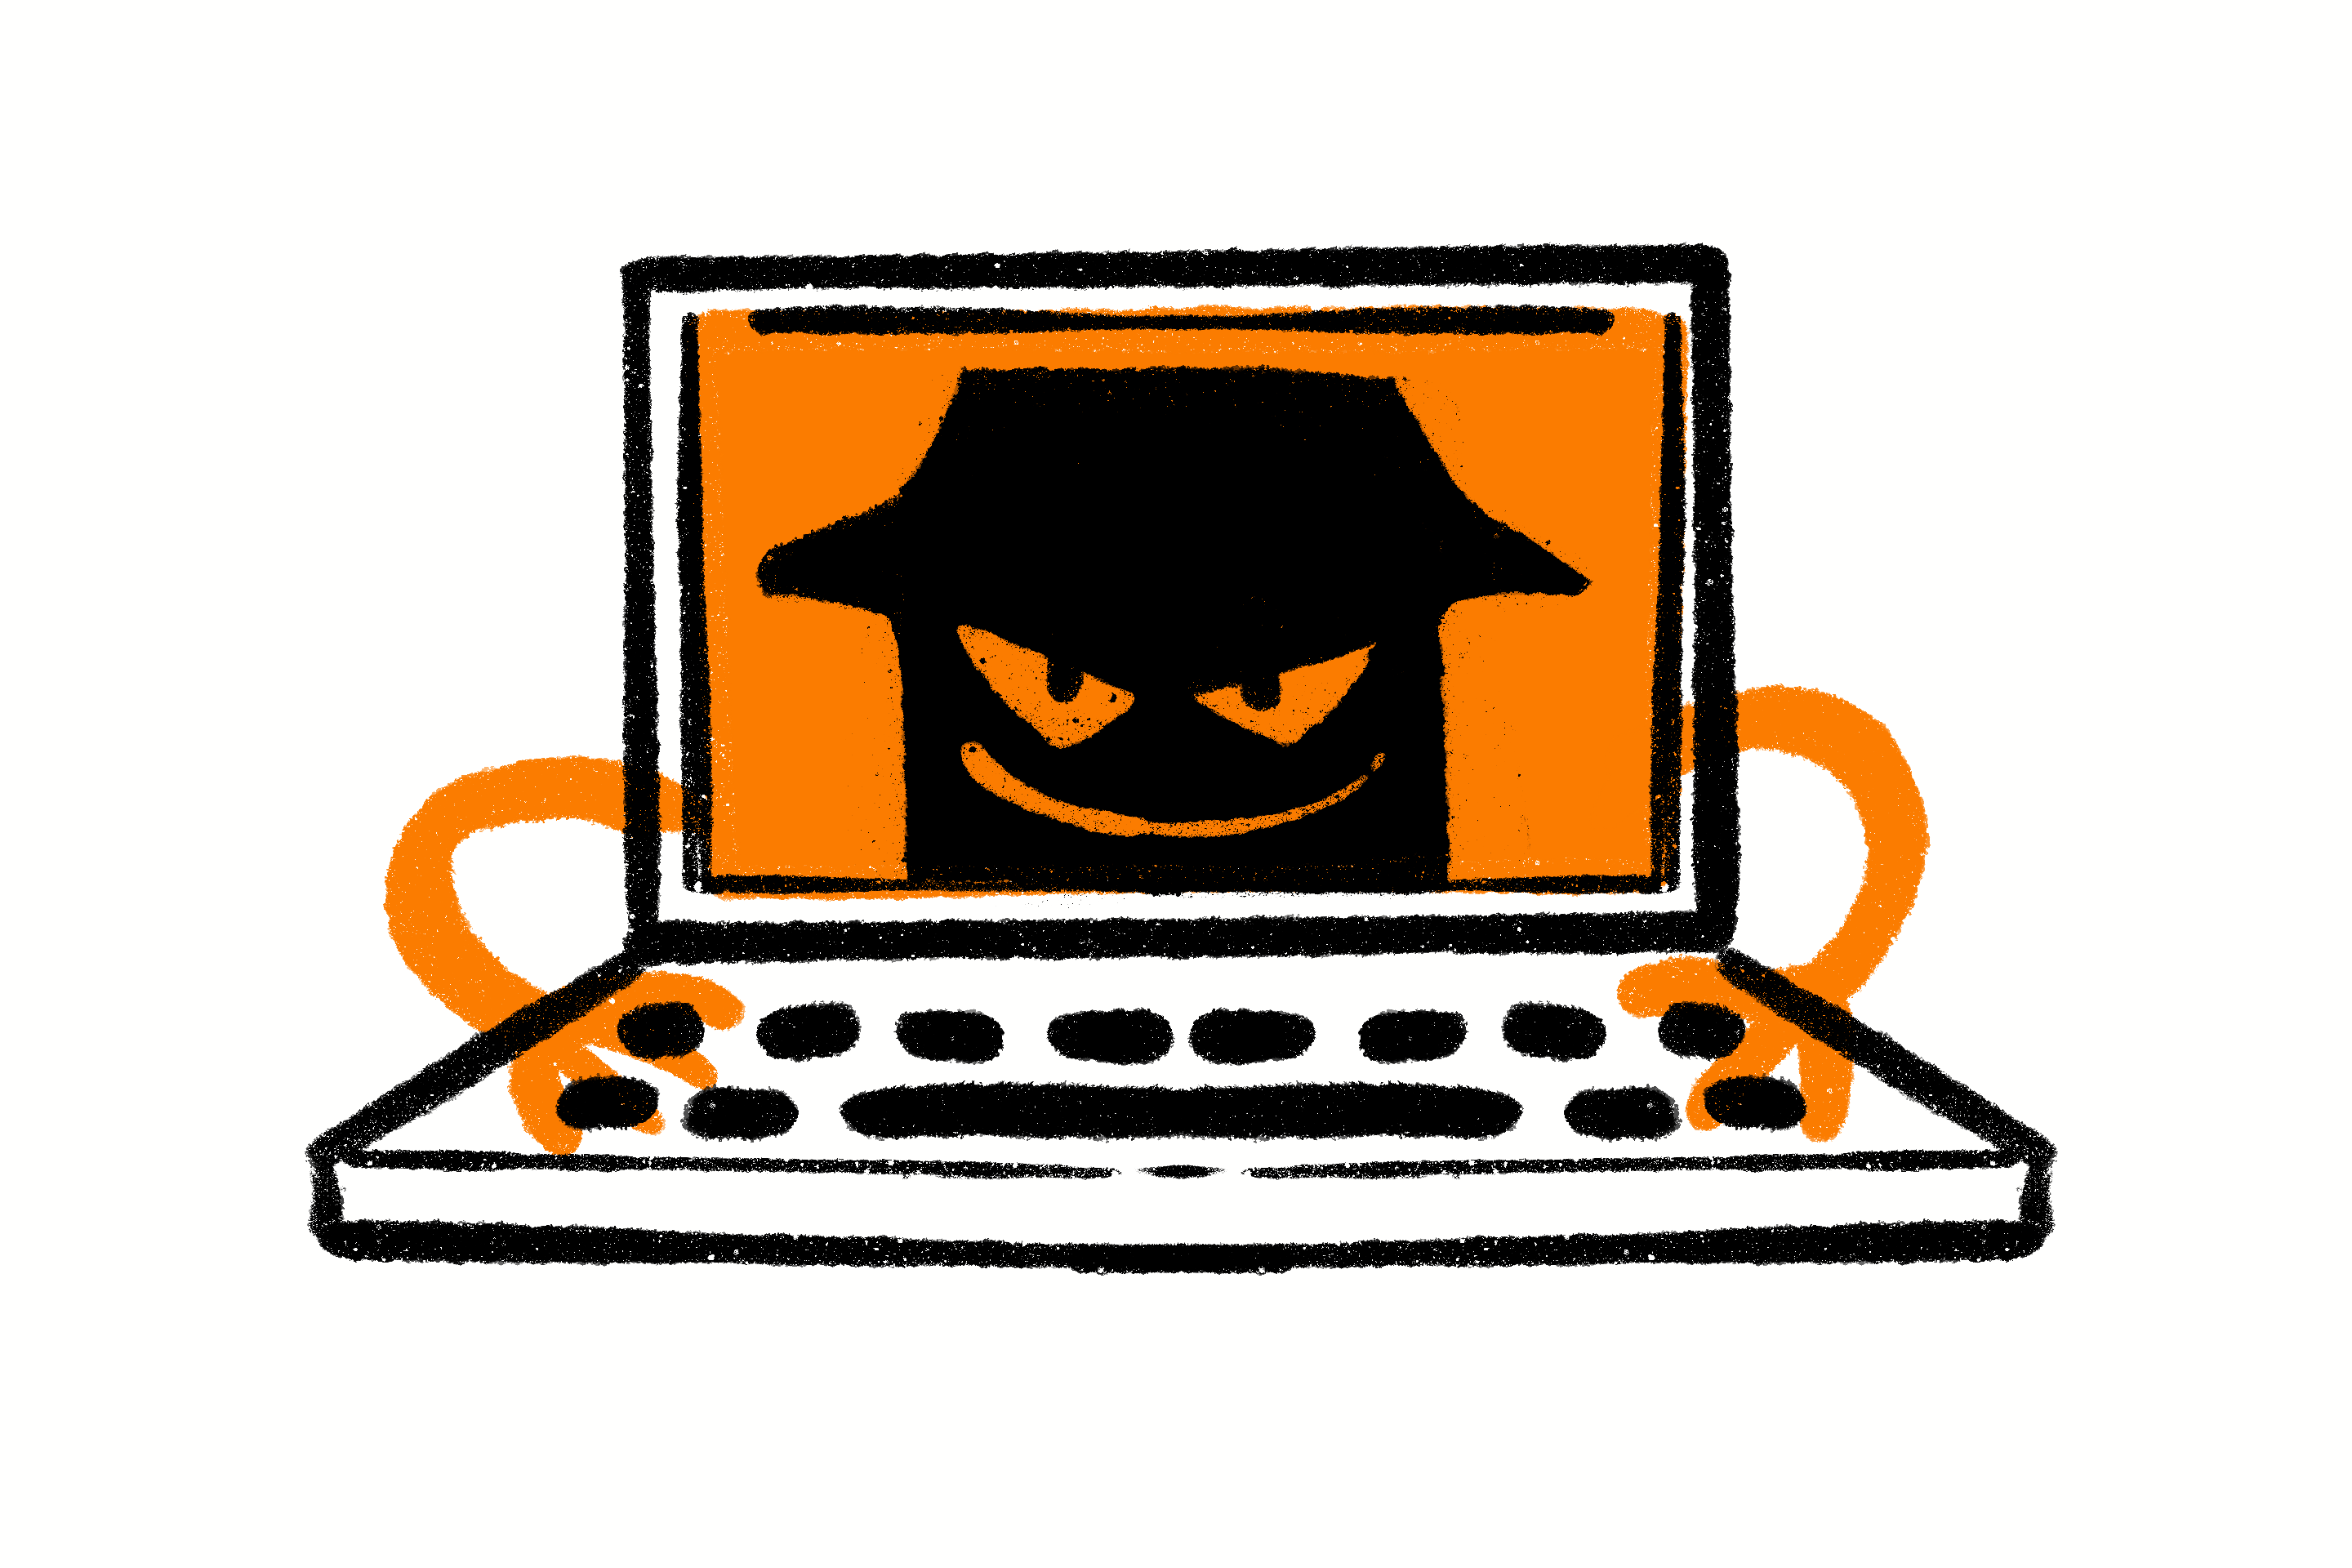 Illustration of laptop with suspicious face